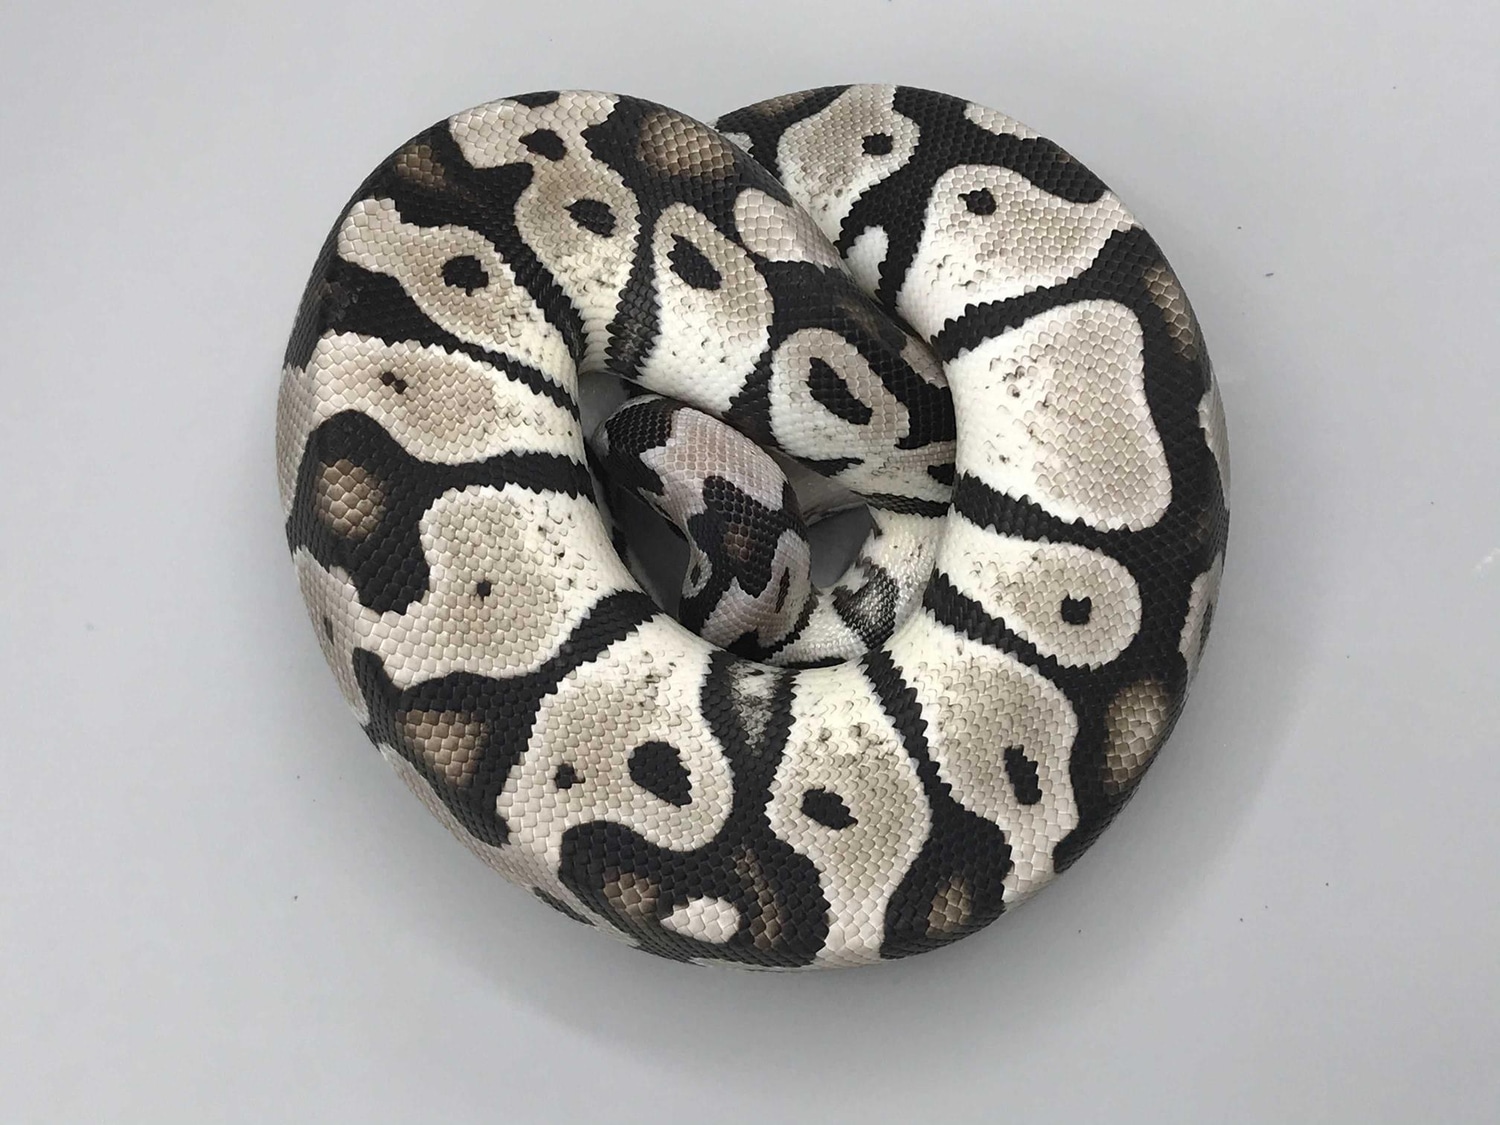 Axanthic Fire Pastel 66% Het Piebald Ball Python by Gateway City Reptiles